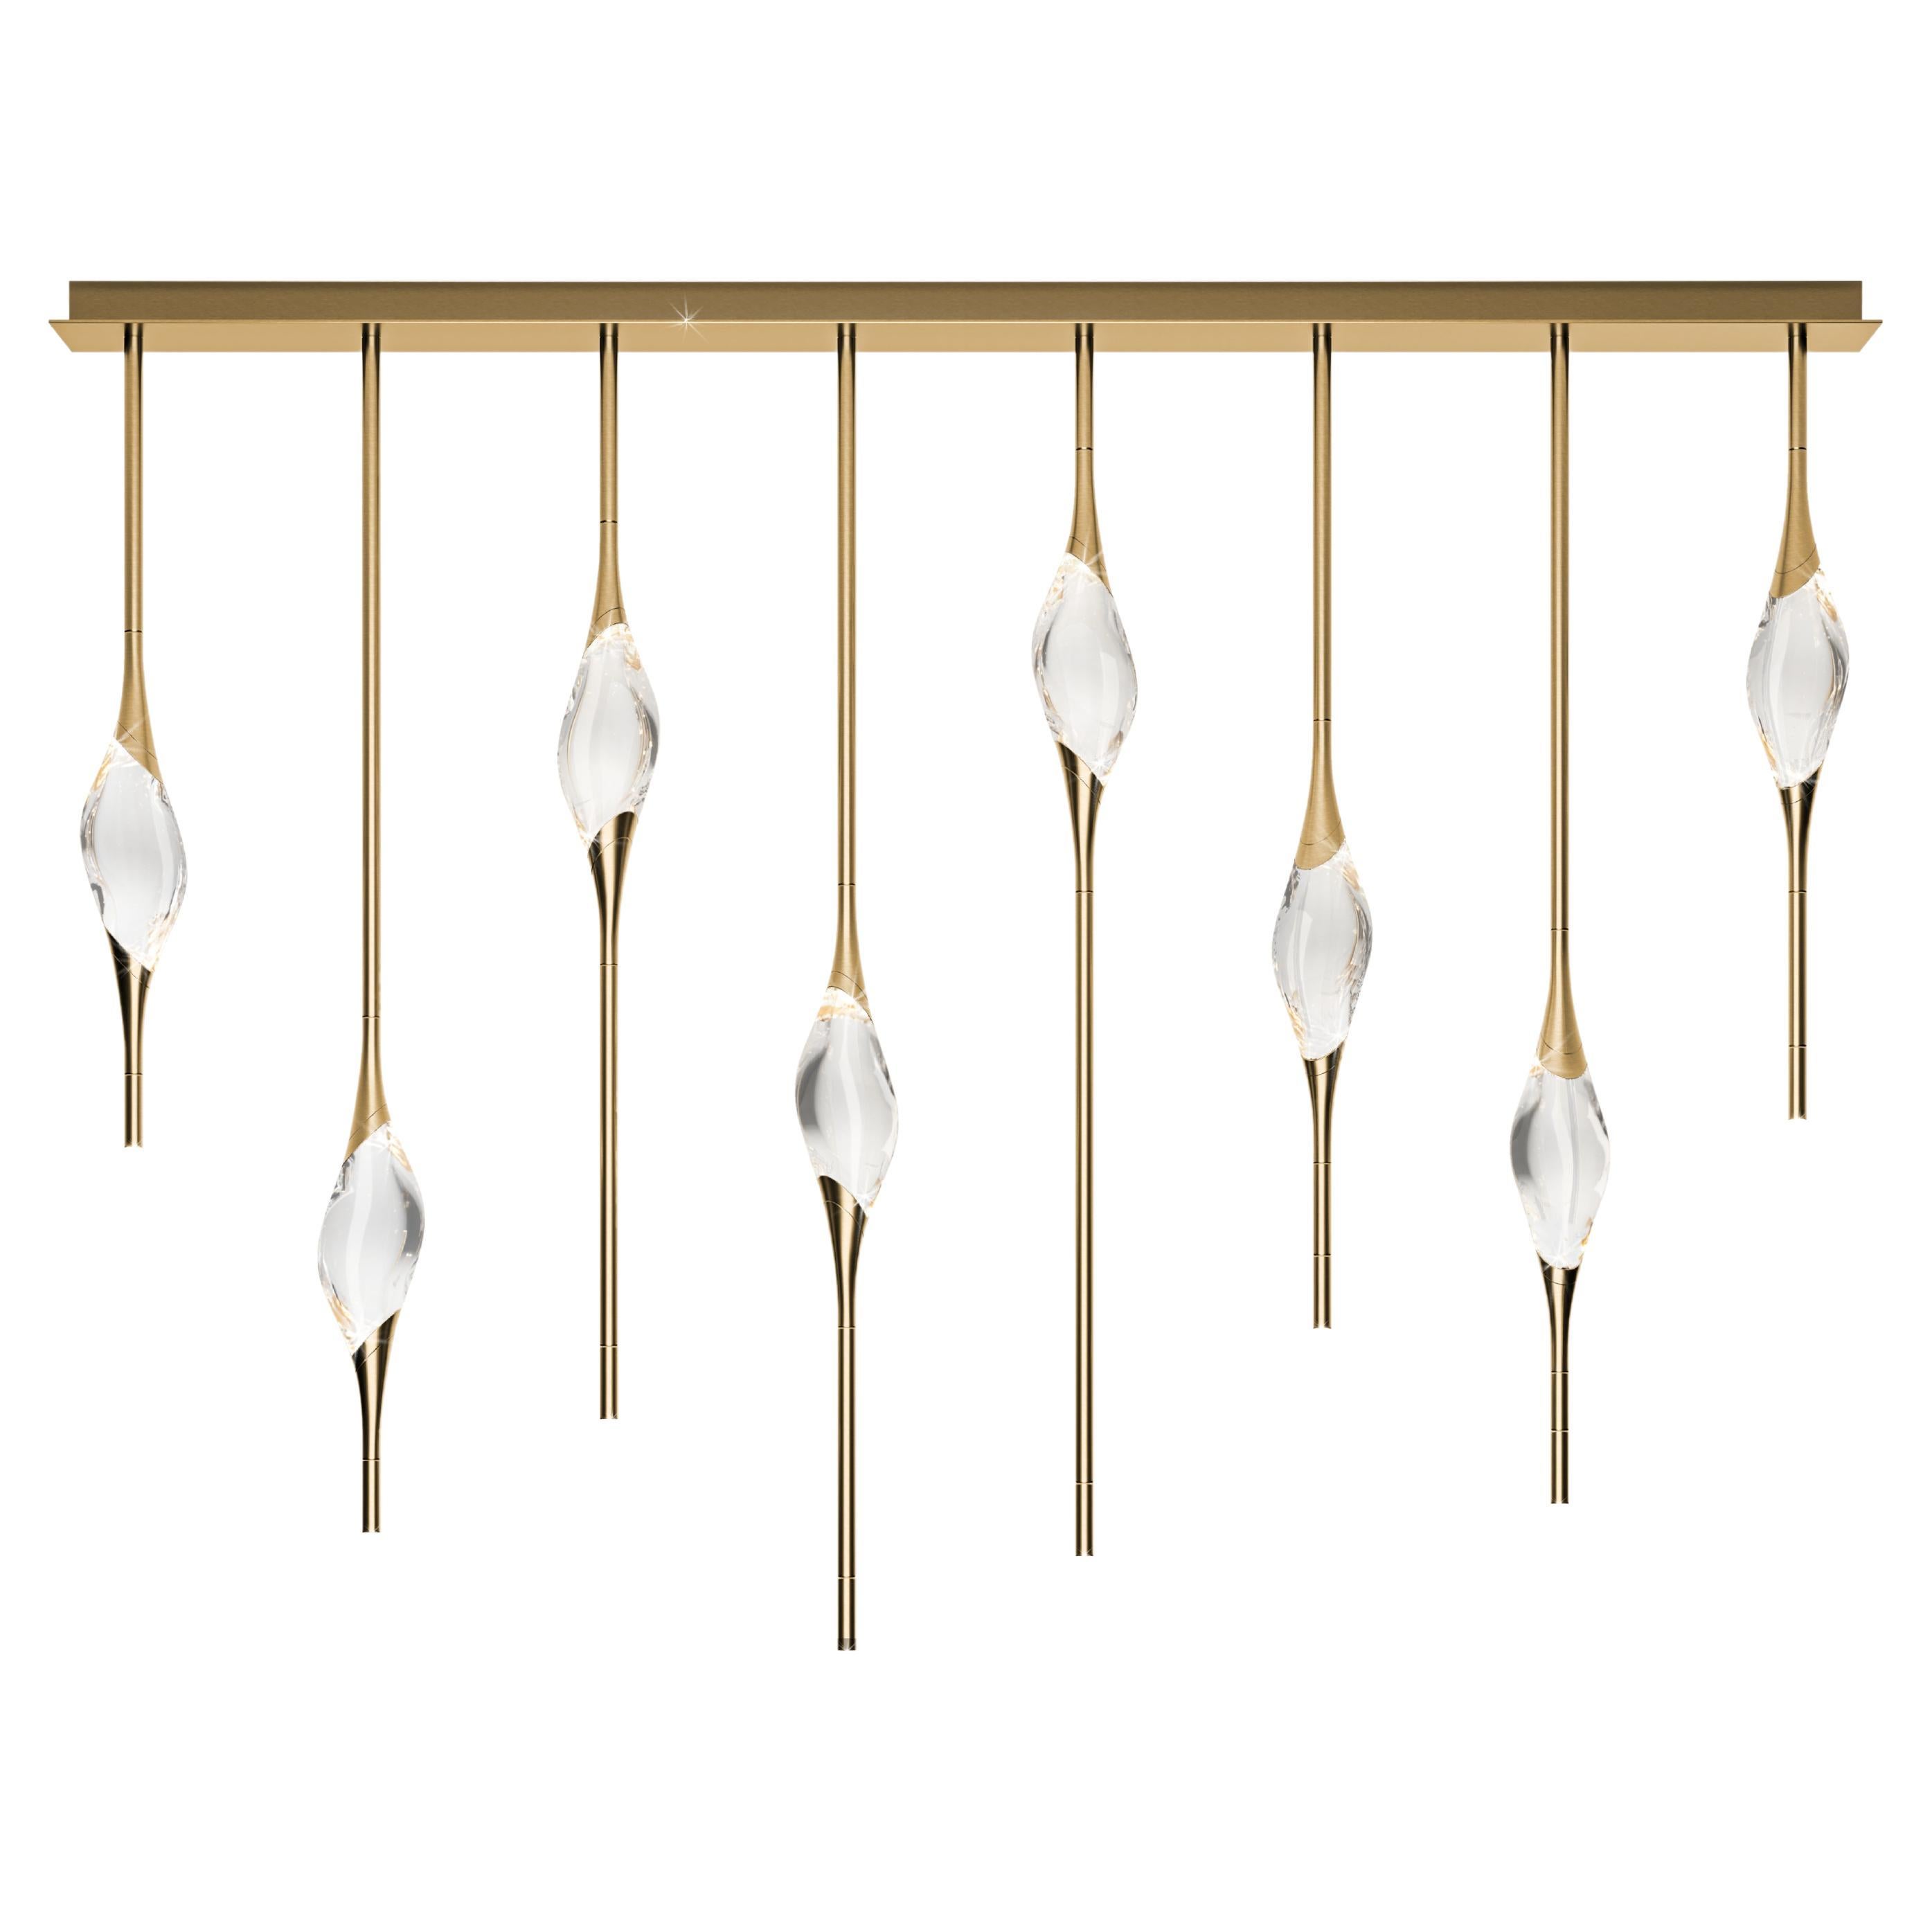 "Il Pezzo 12 Staggered Chandelier" - length 160cm/63” - polished brass - crystal For Sale